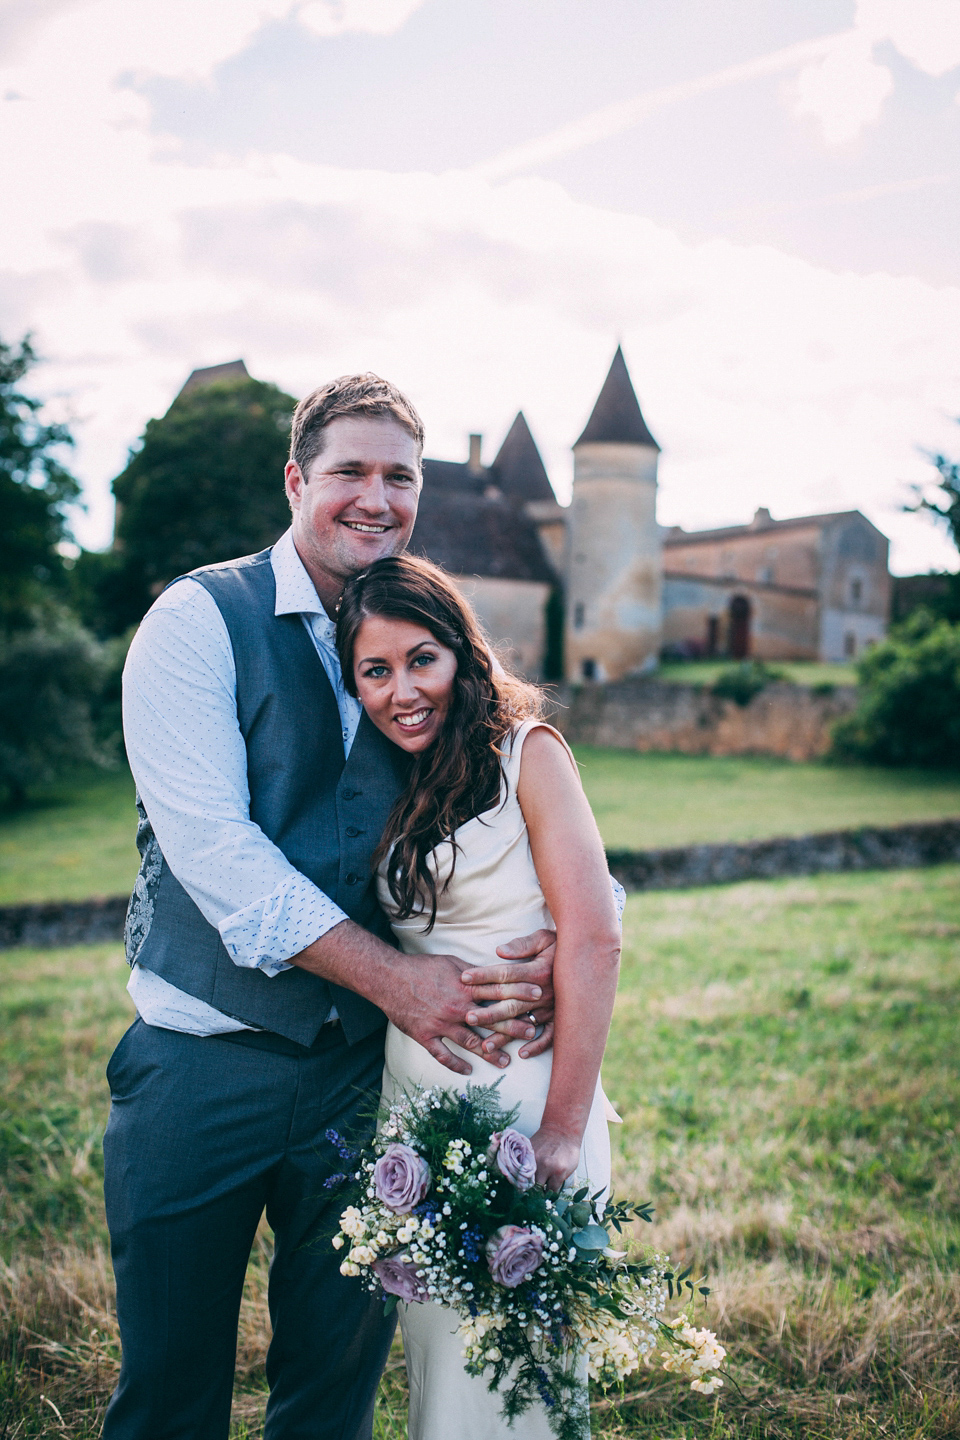 Bride Katie wears a David Fielden gown for her wedding in the Dordogne. Photography by Casey Avenue.